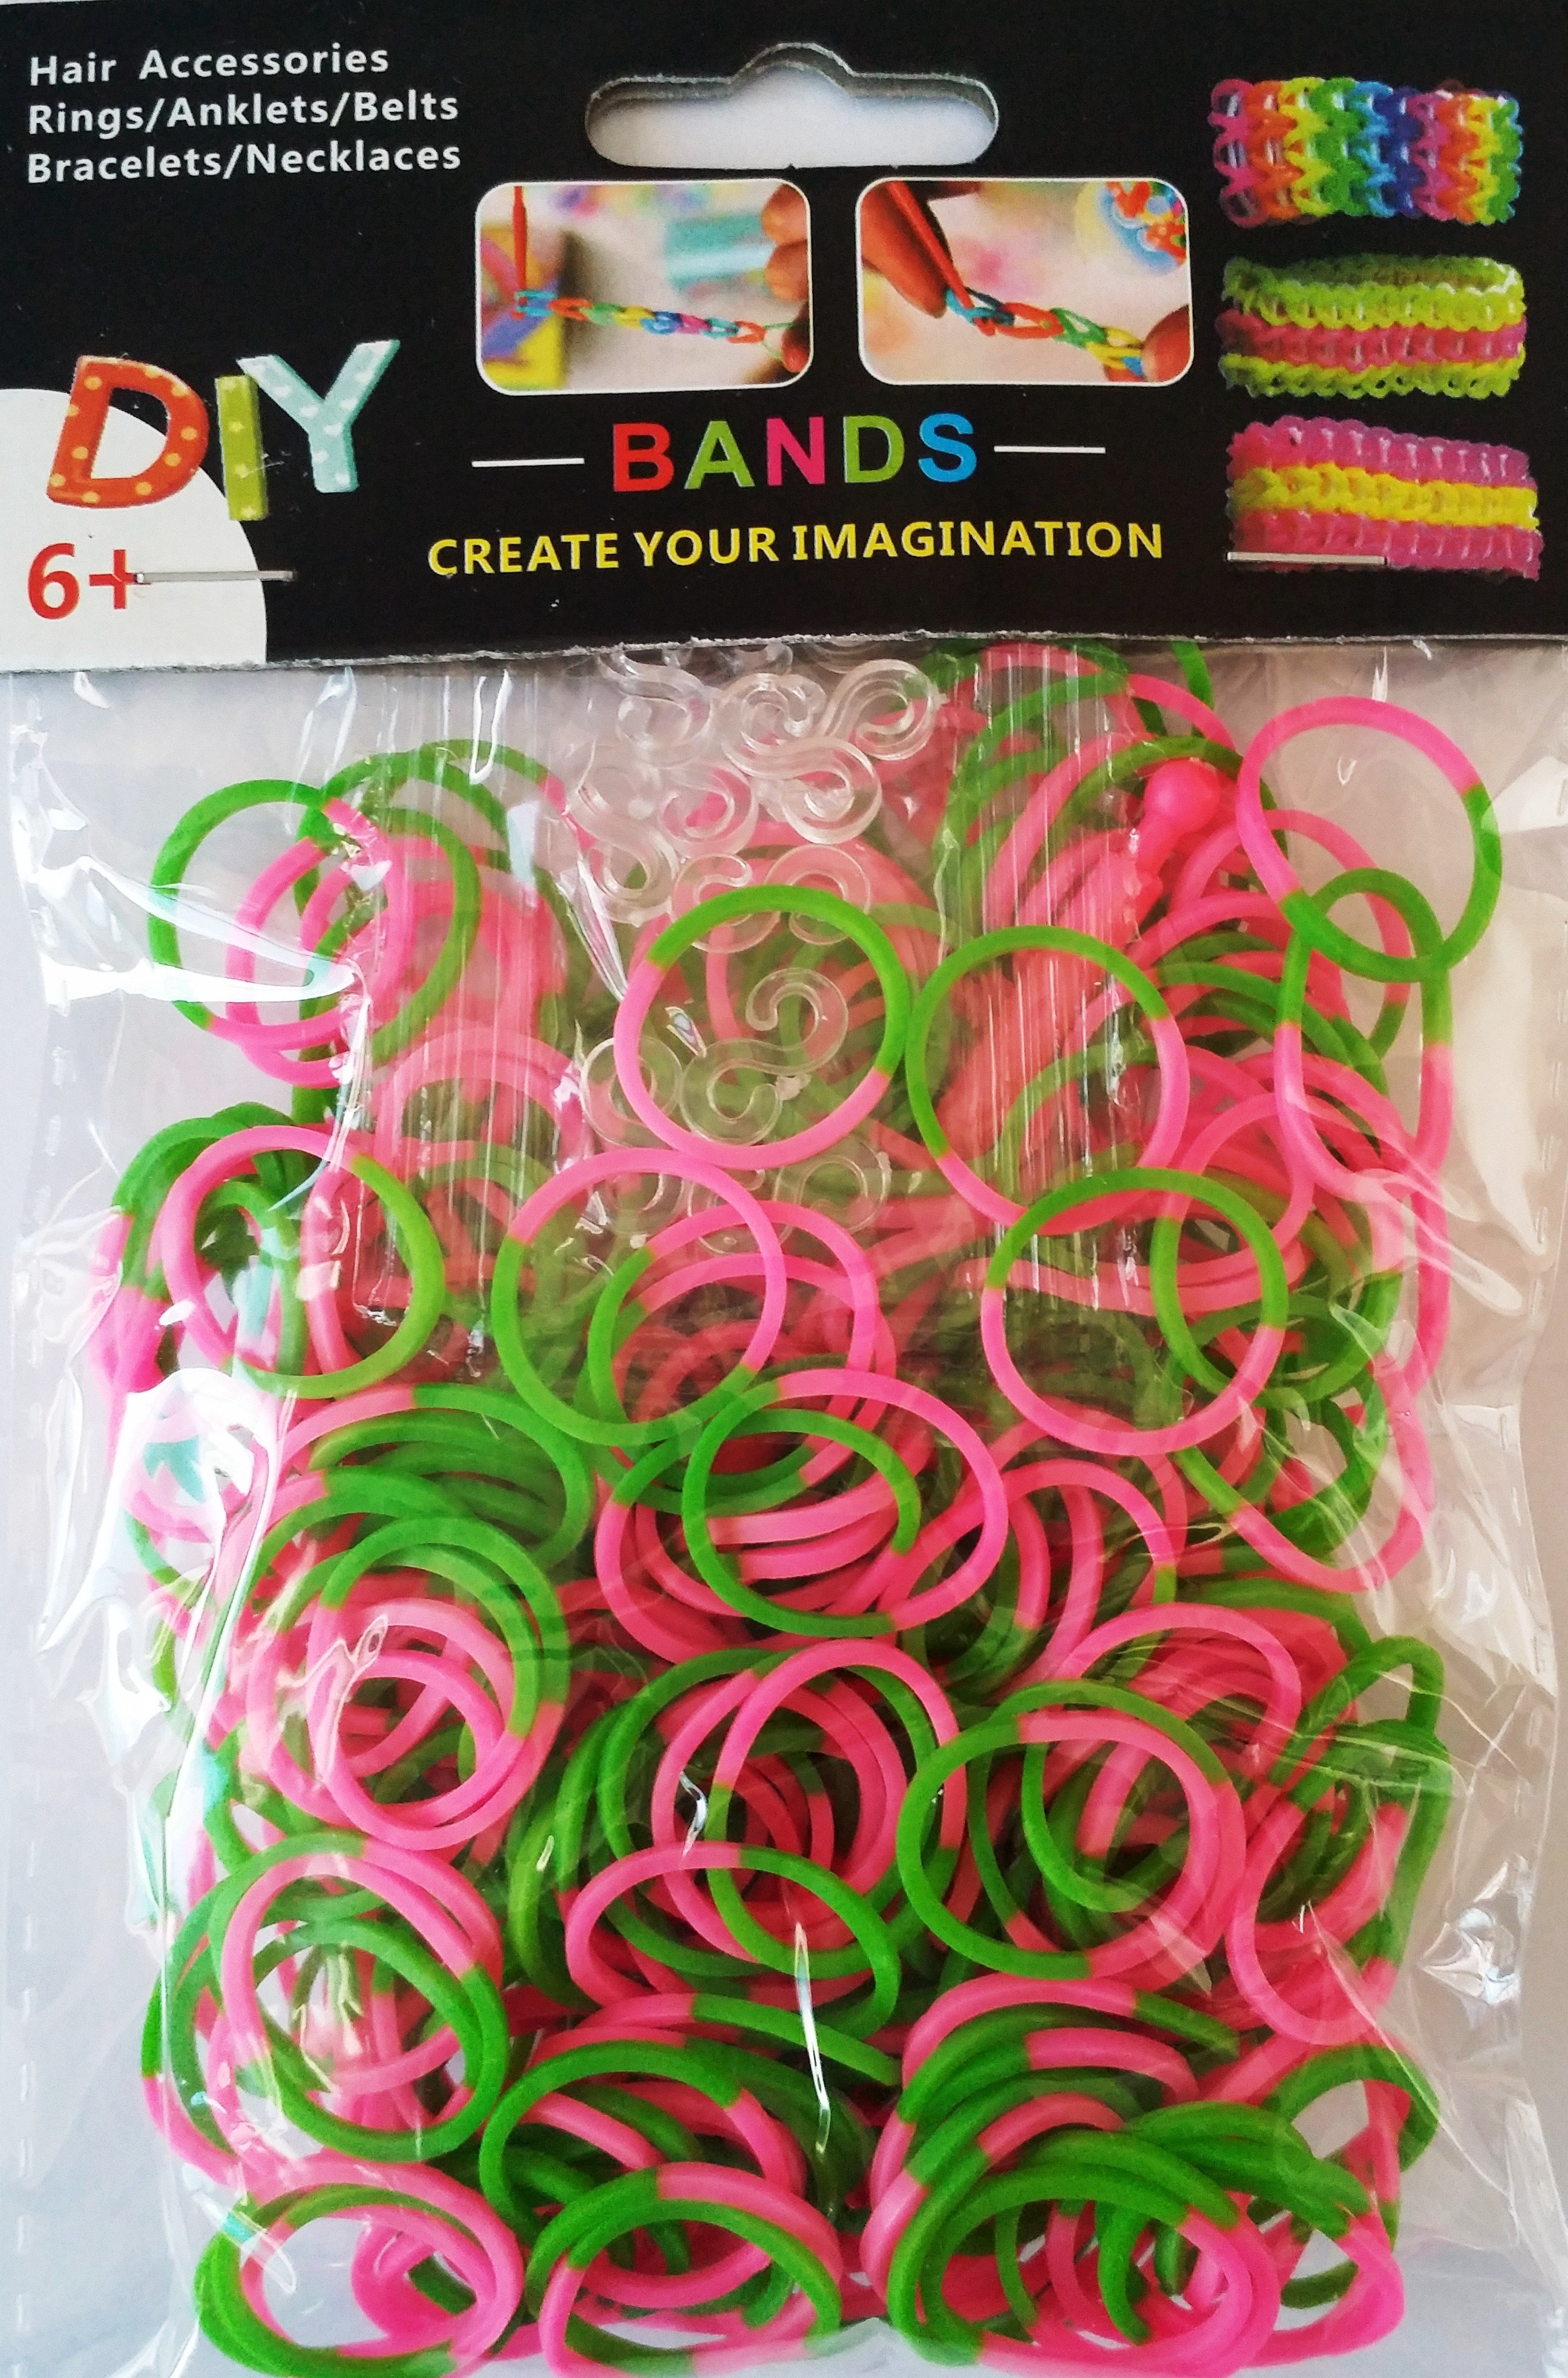 NEW 2 Tone Loom Bands- (Pink And Green) 300s x 12 Packs